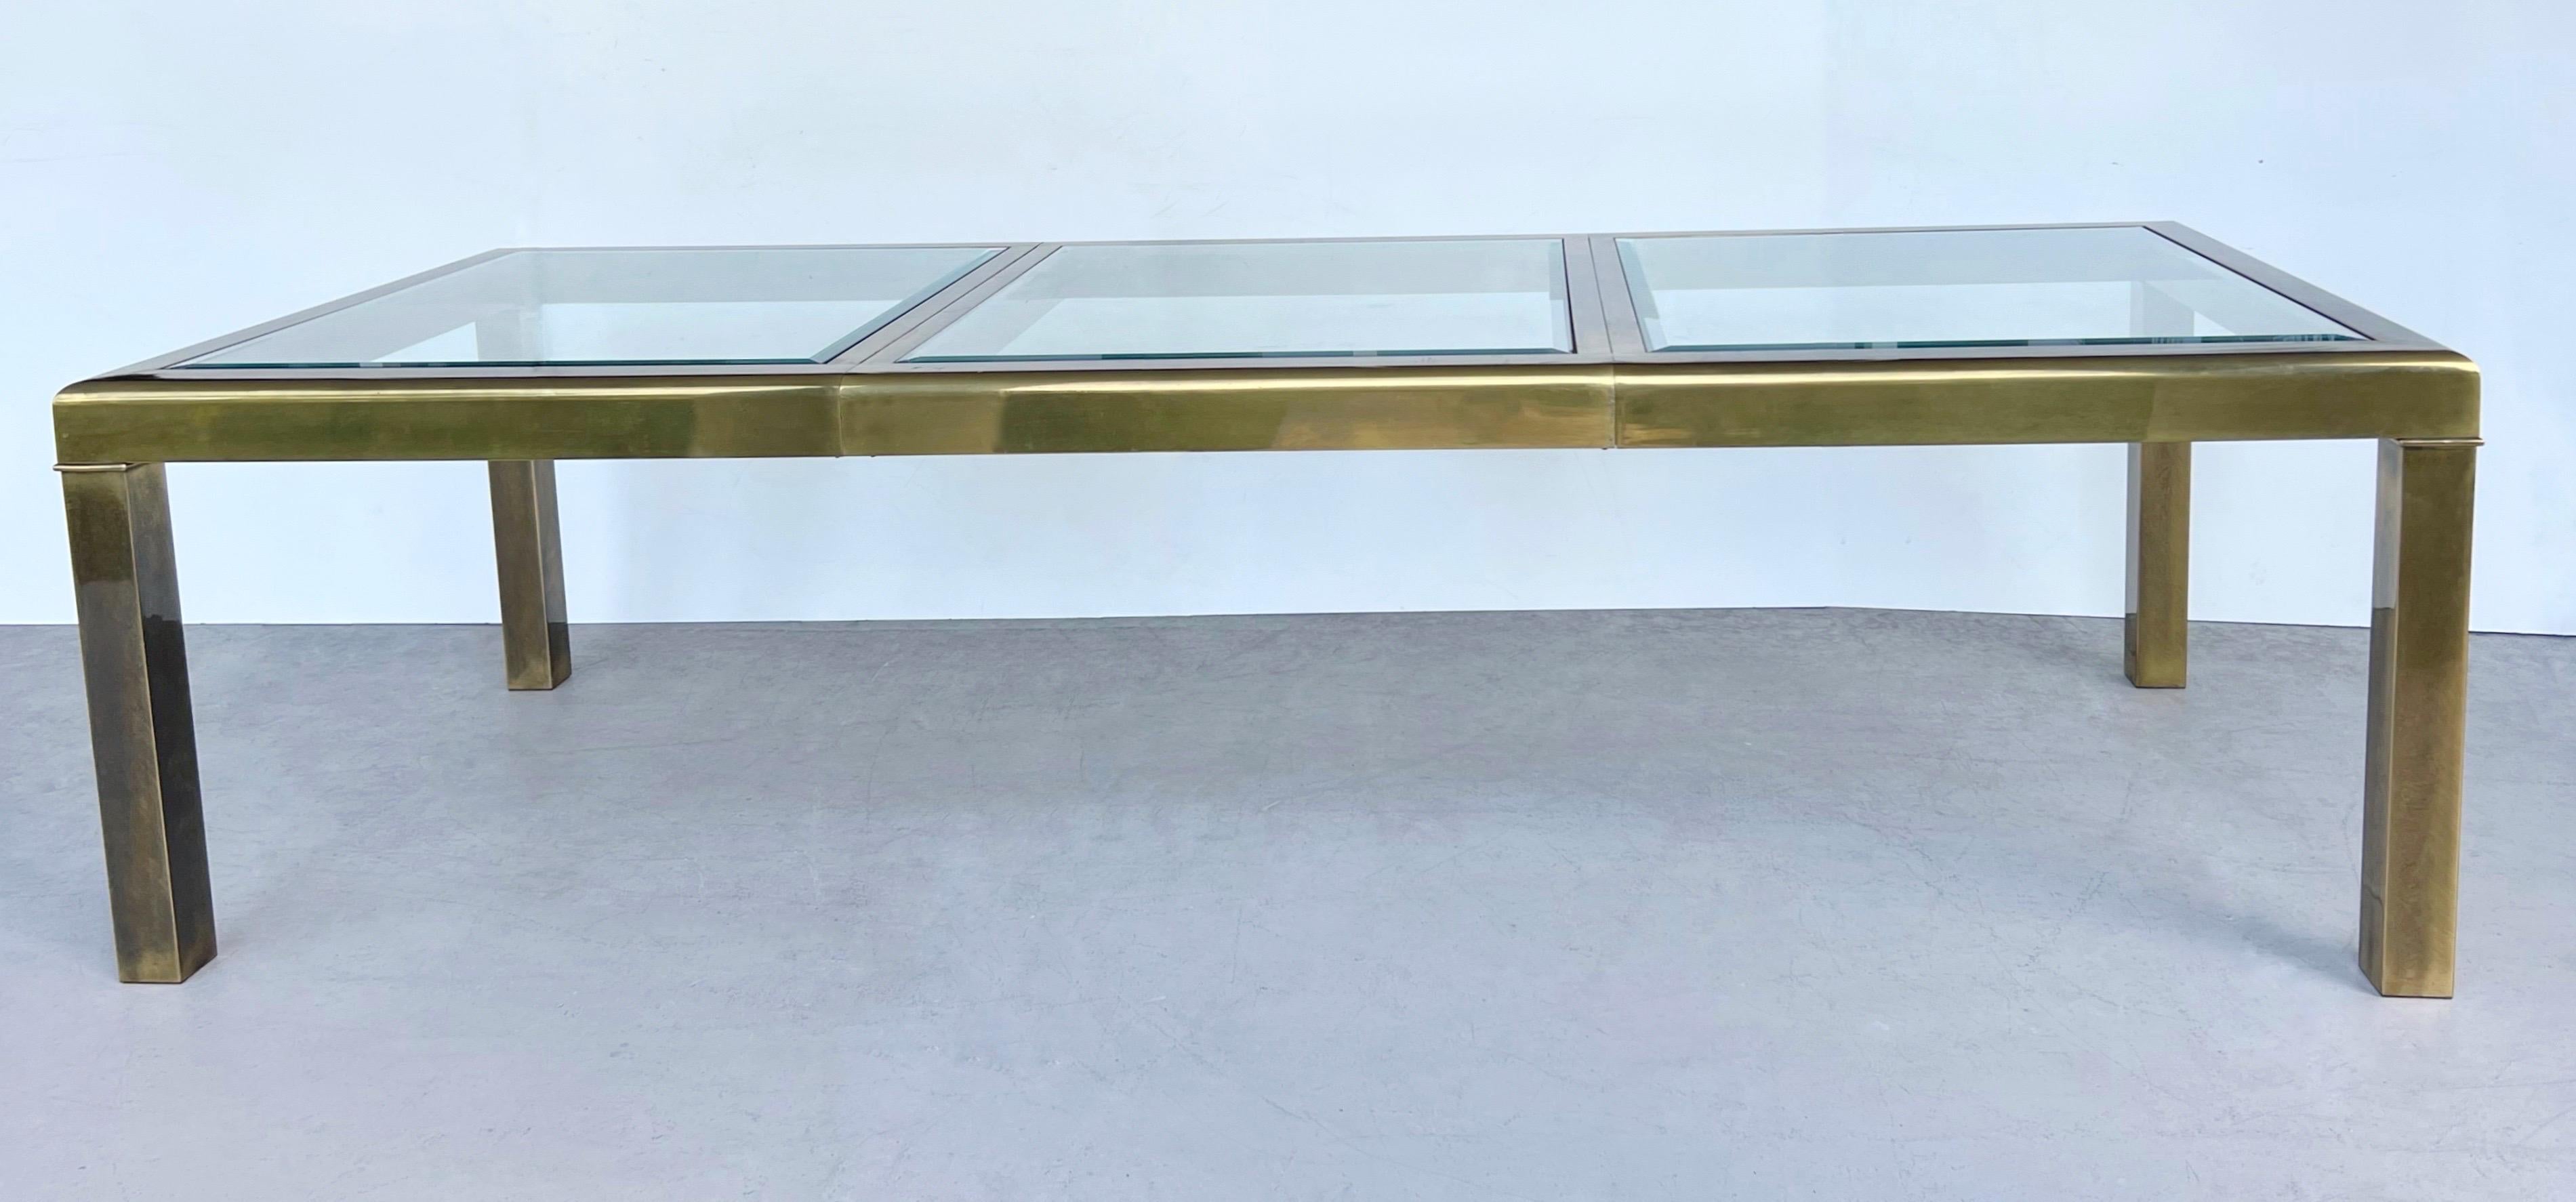 A classic Mastercraft dining table. Handsome and substantial brass frame. Angular design with subtle radial edge along the perimeter of the top. The inset glass tops are beveled and removable. 